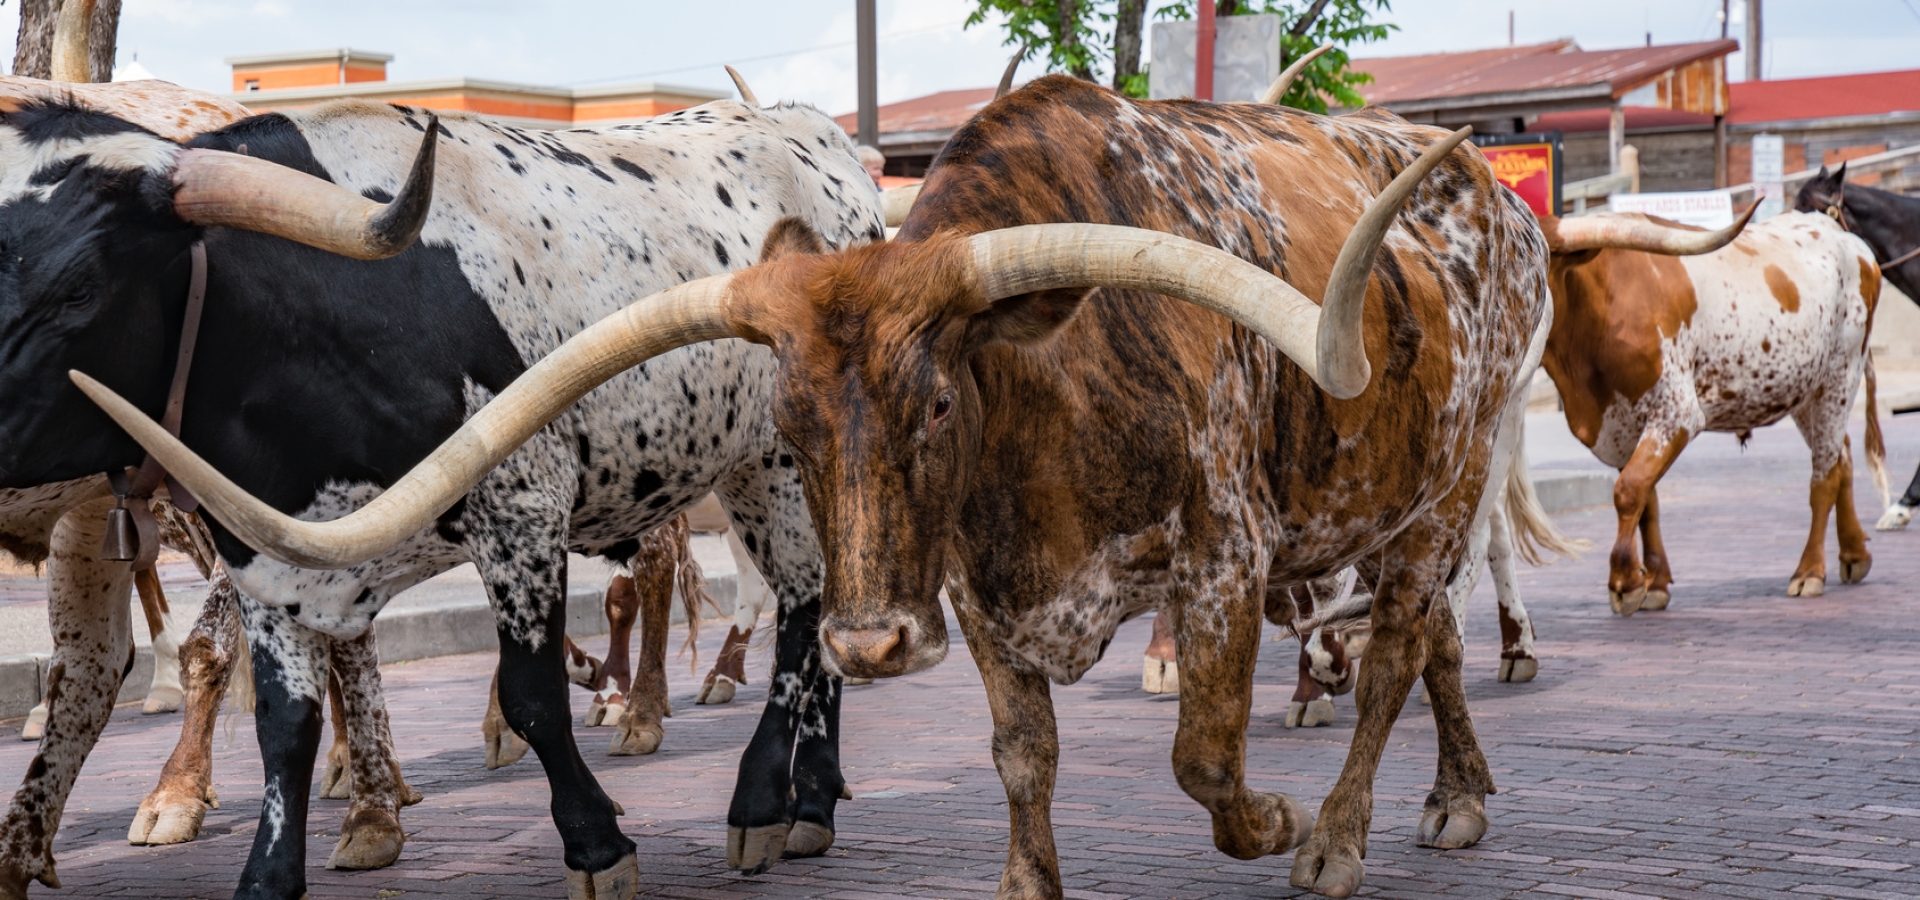 Experience The Cowboy Spirit Of Fort Worth, Texas